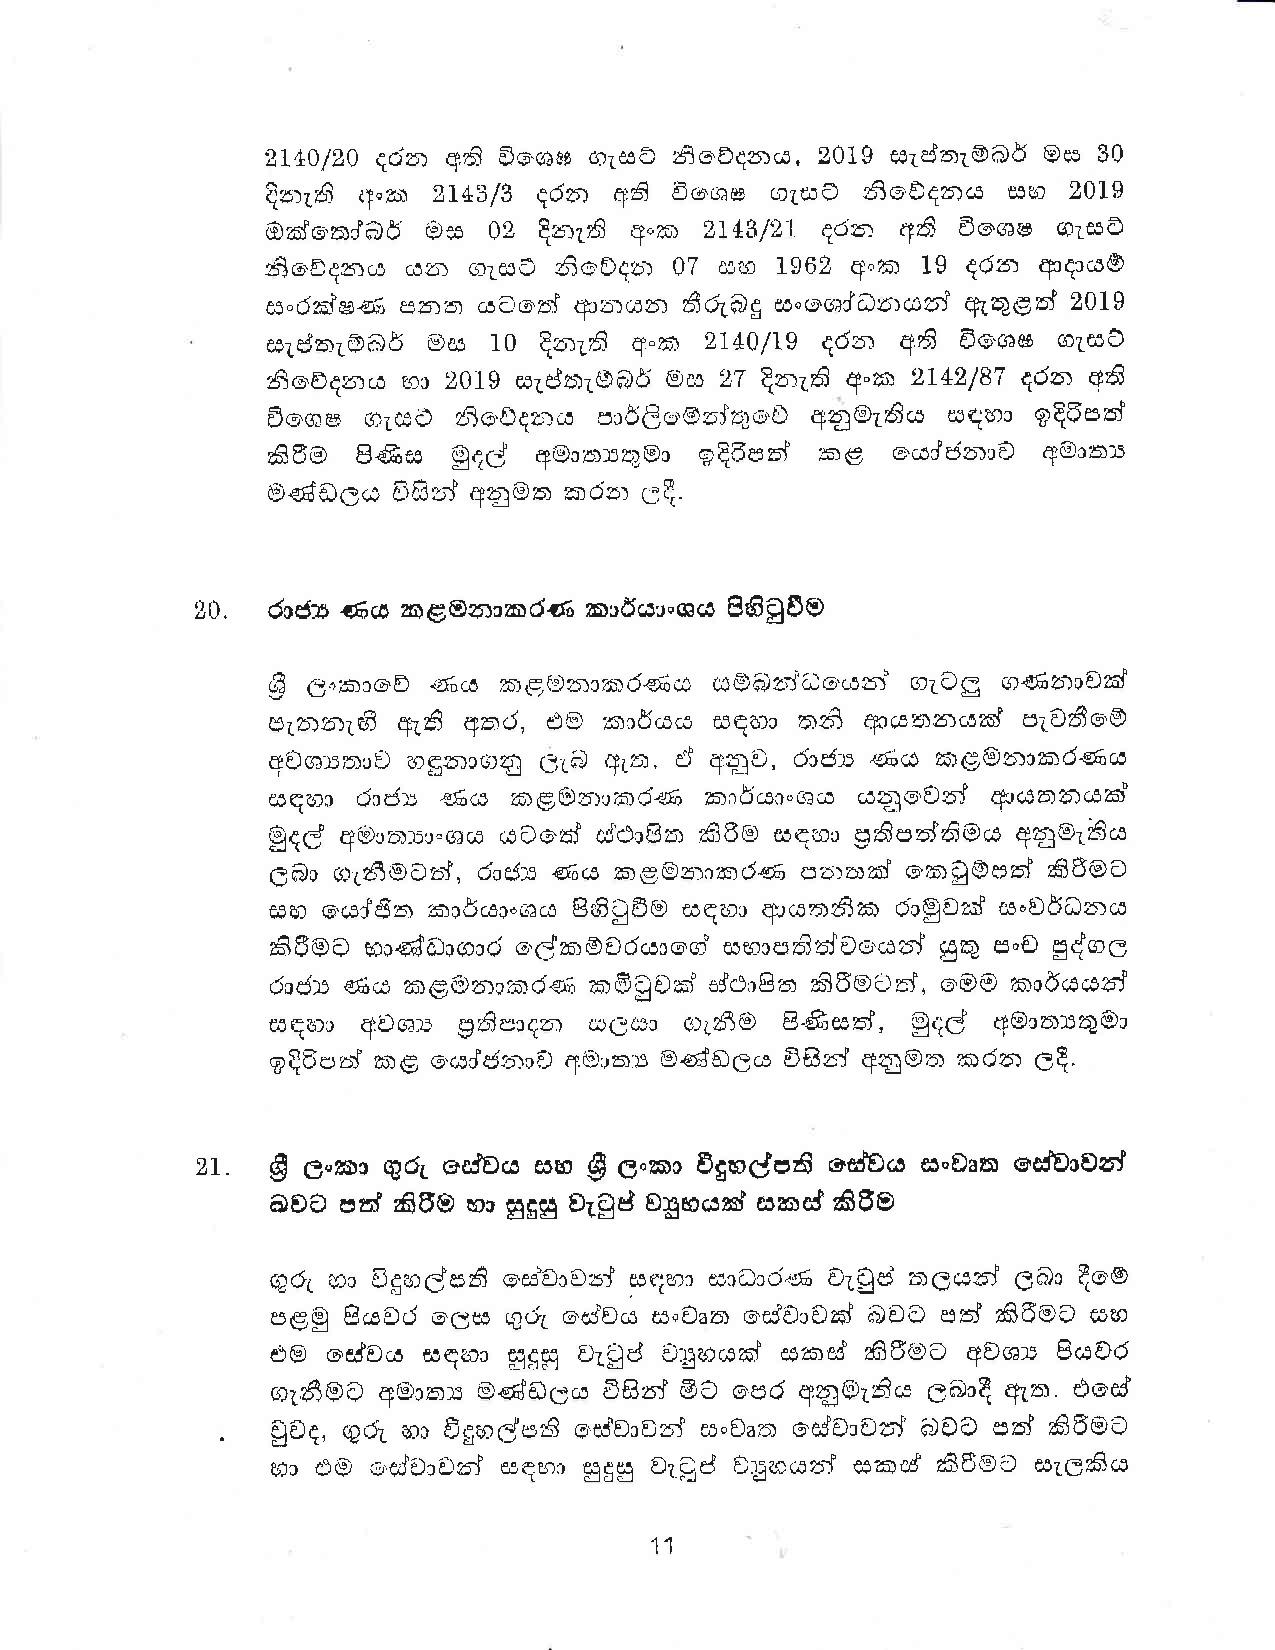 Cabinet Decision on 15.10.2019 page 011